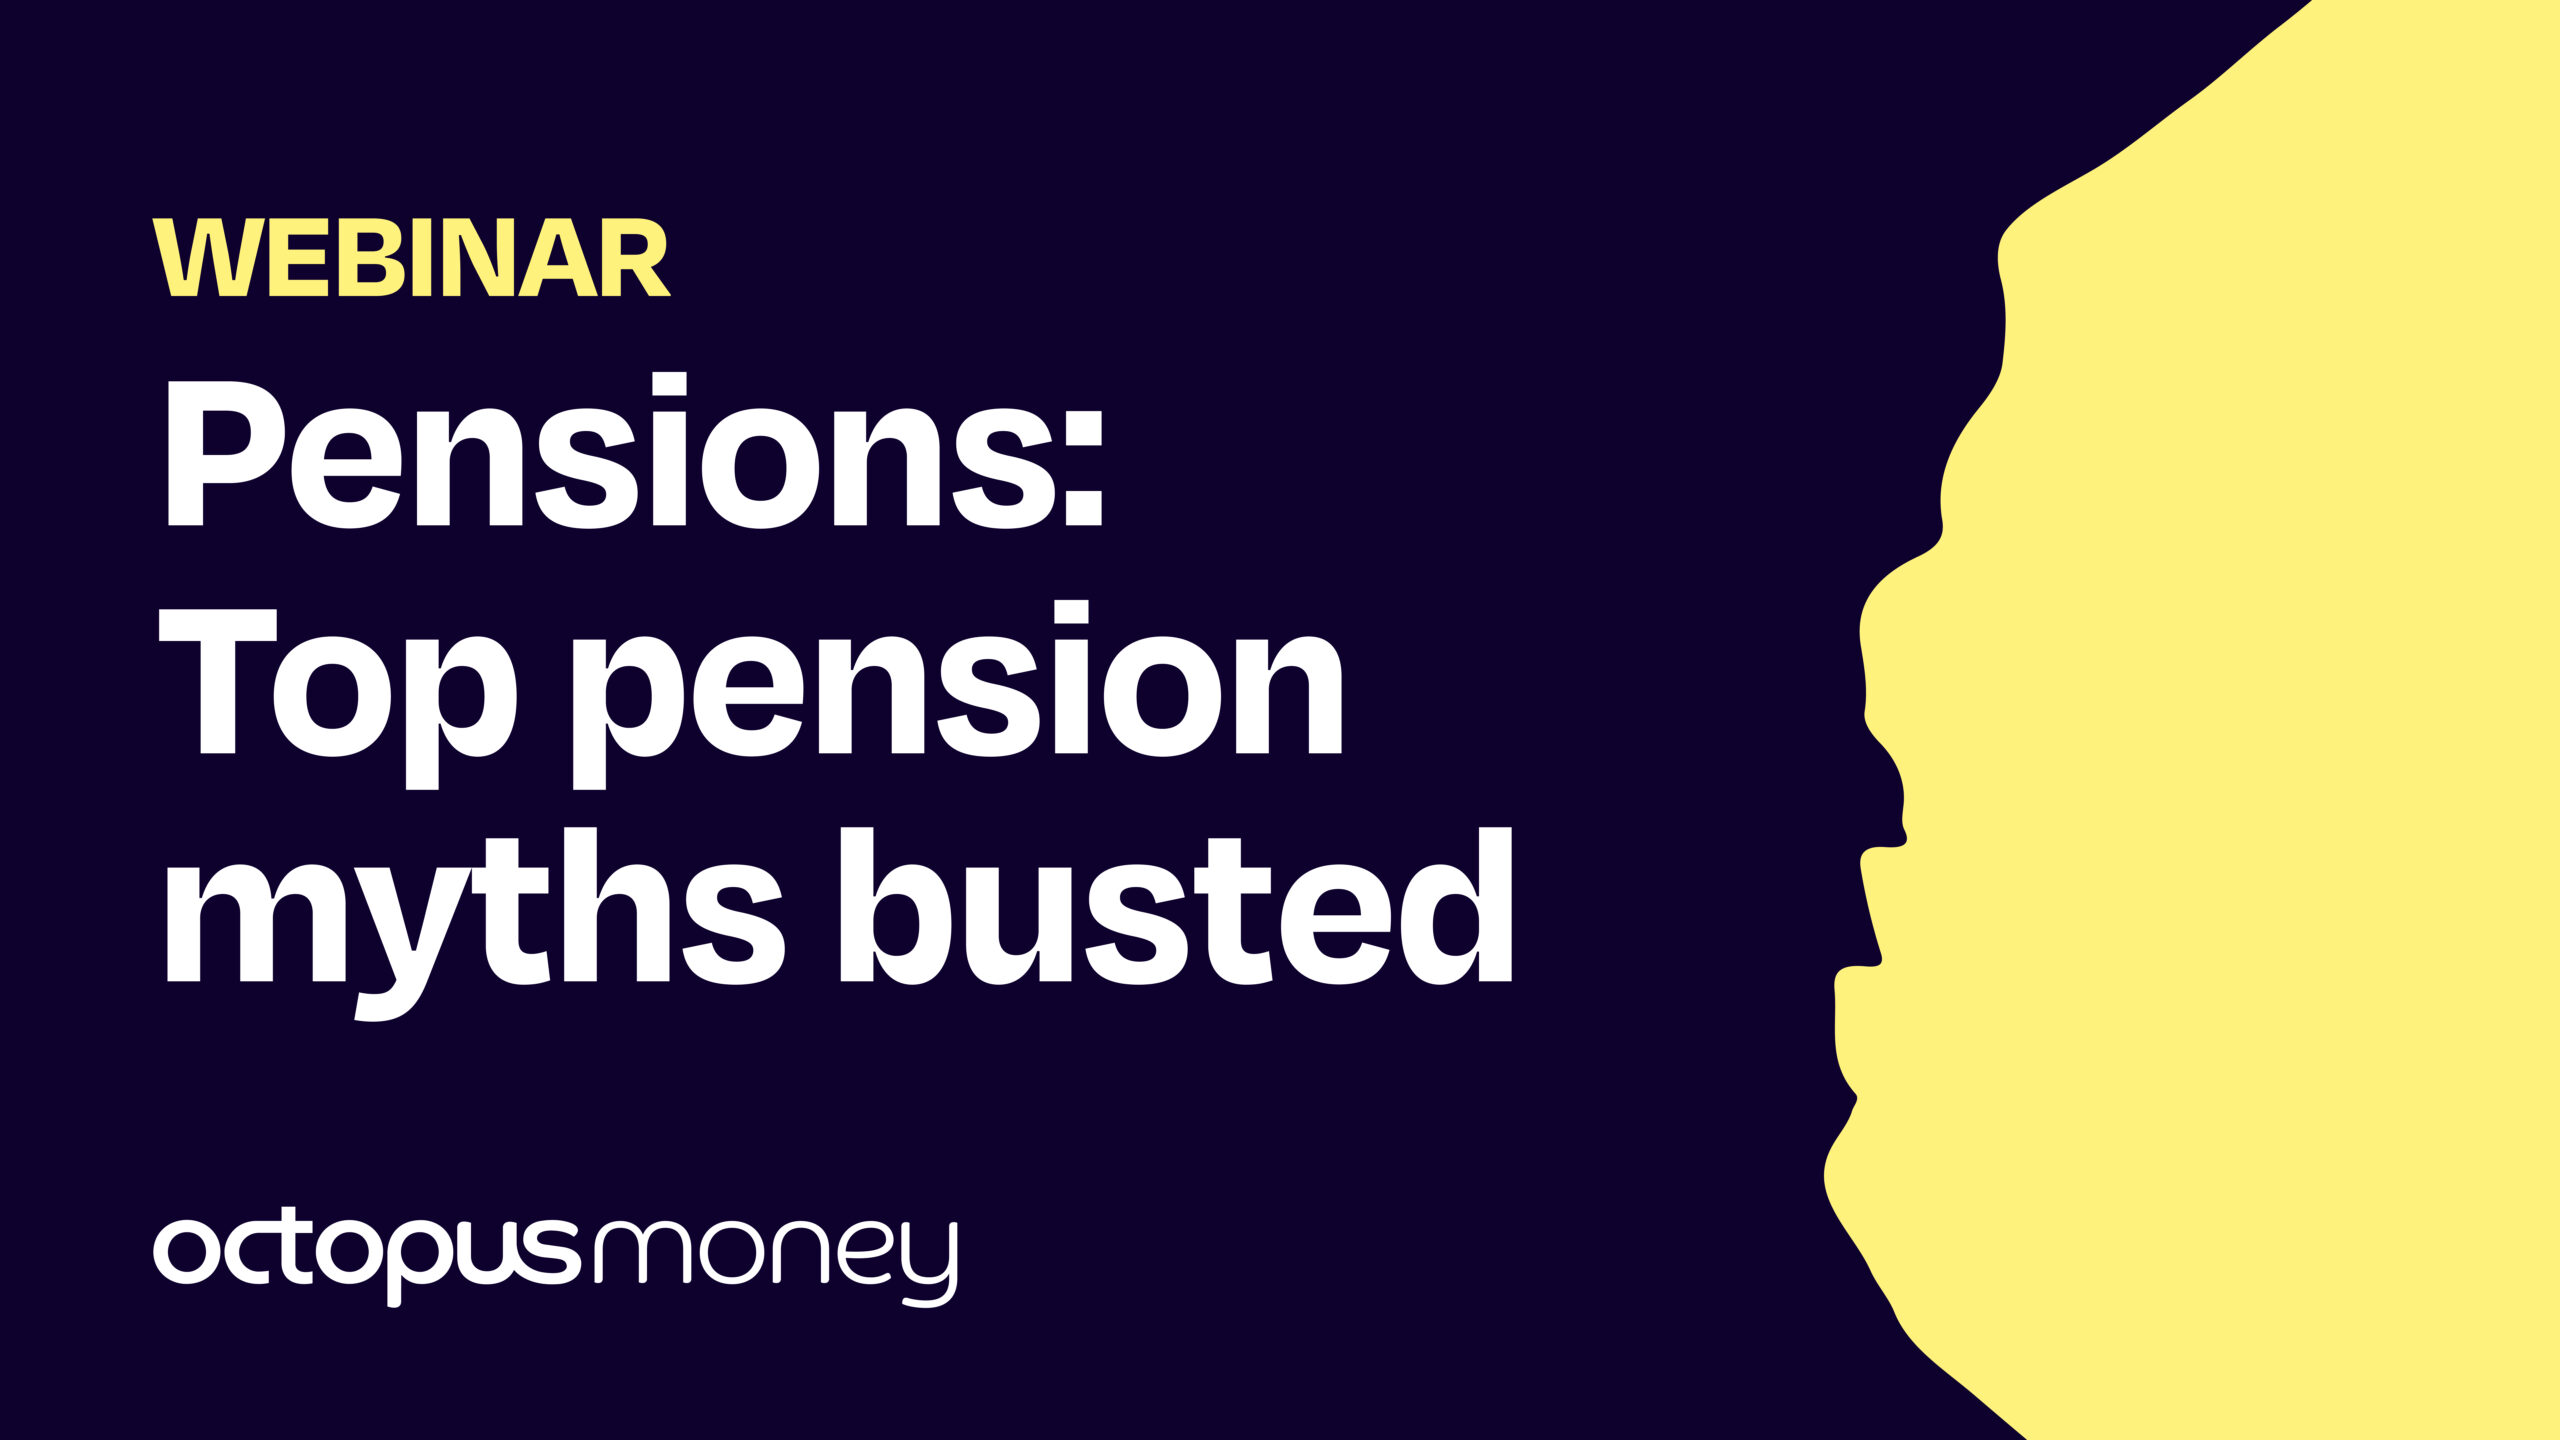 Top pension myths busted